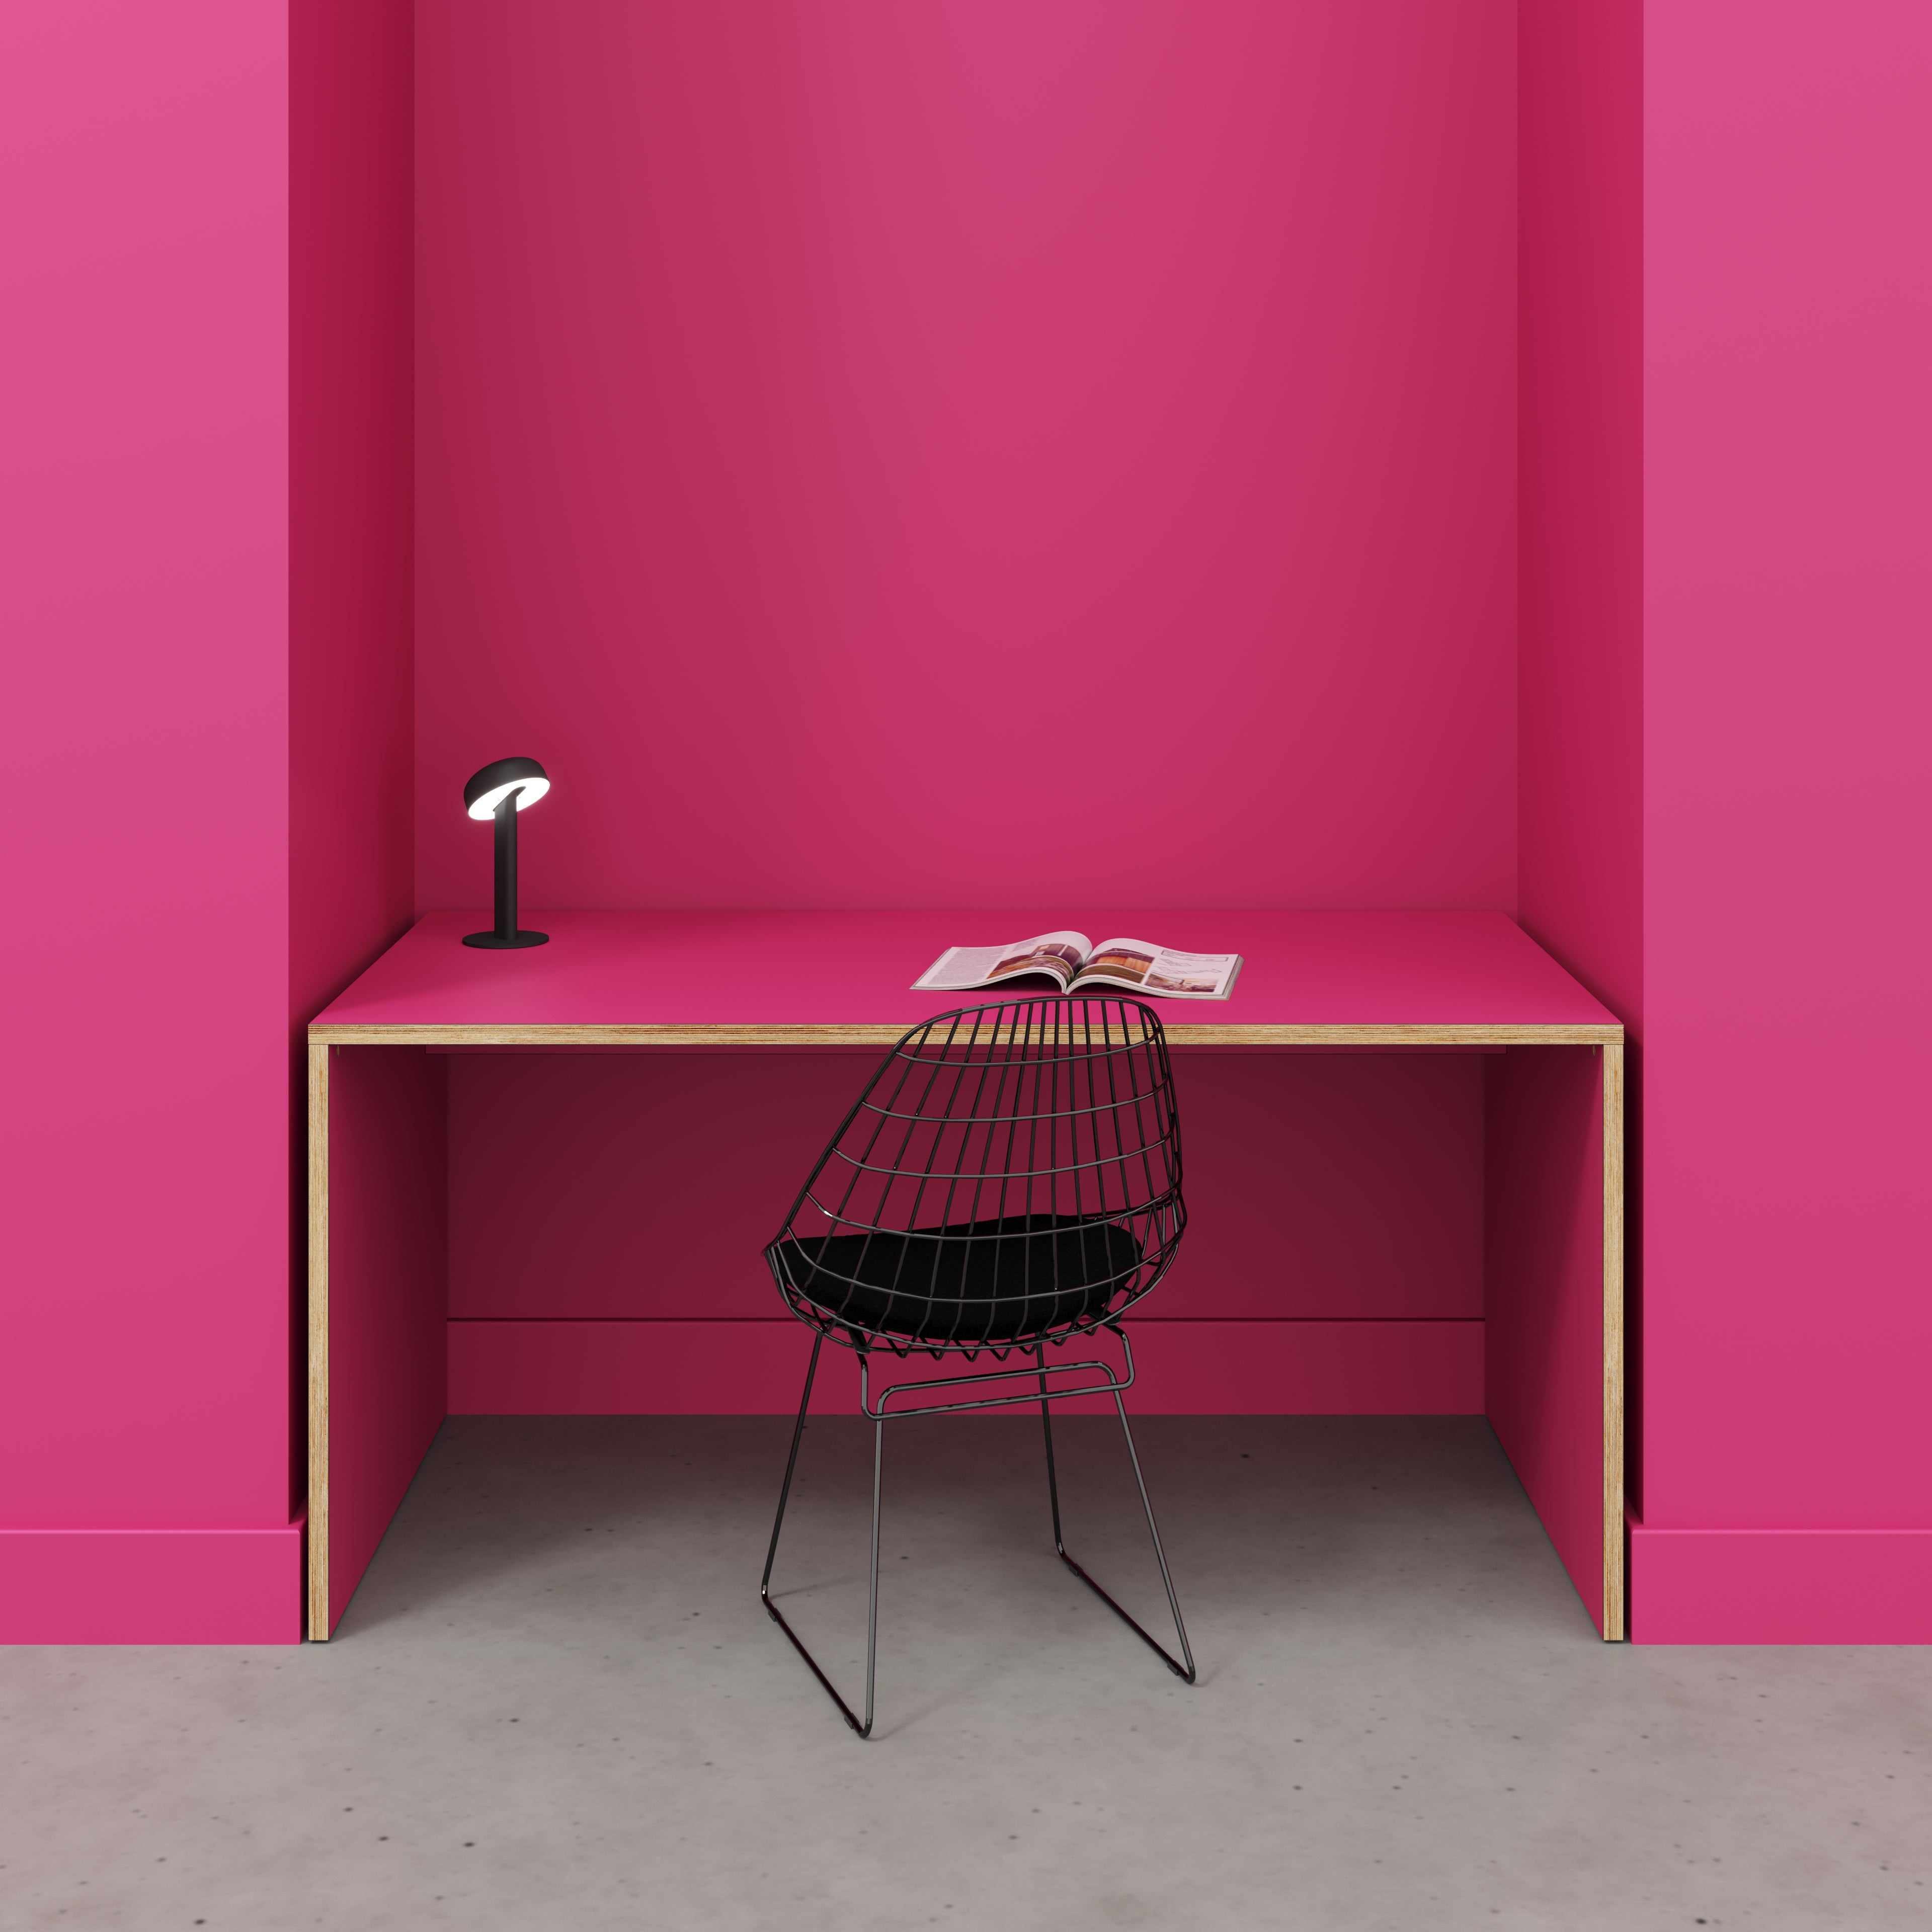 Desk with Solid Sides - Formica Juicy Pink - 1600(w) x 800(d) x 750(h)